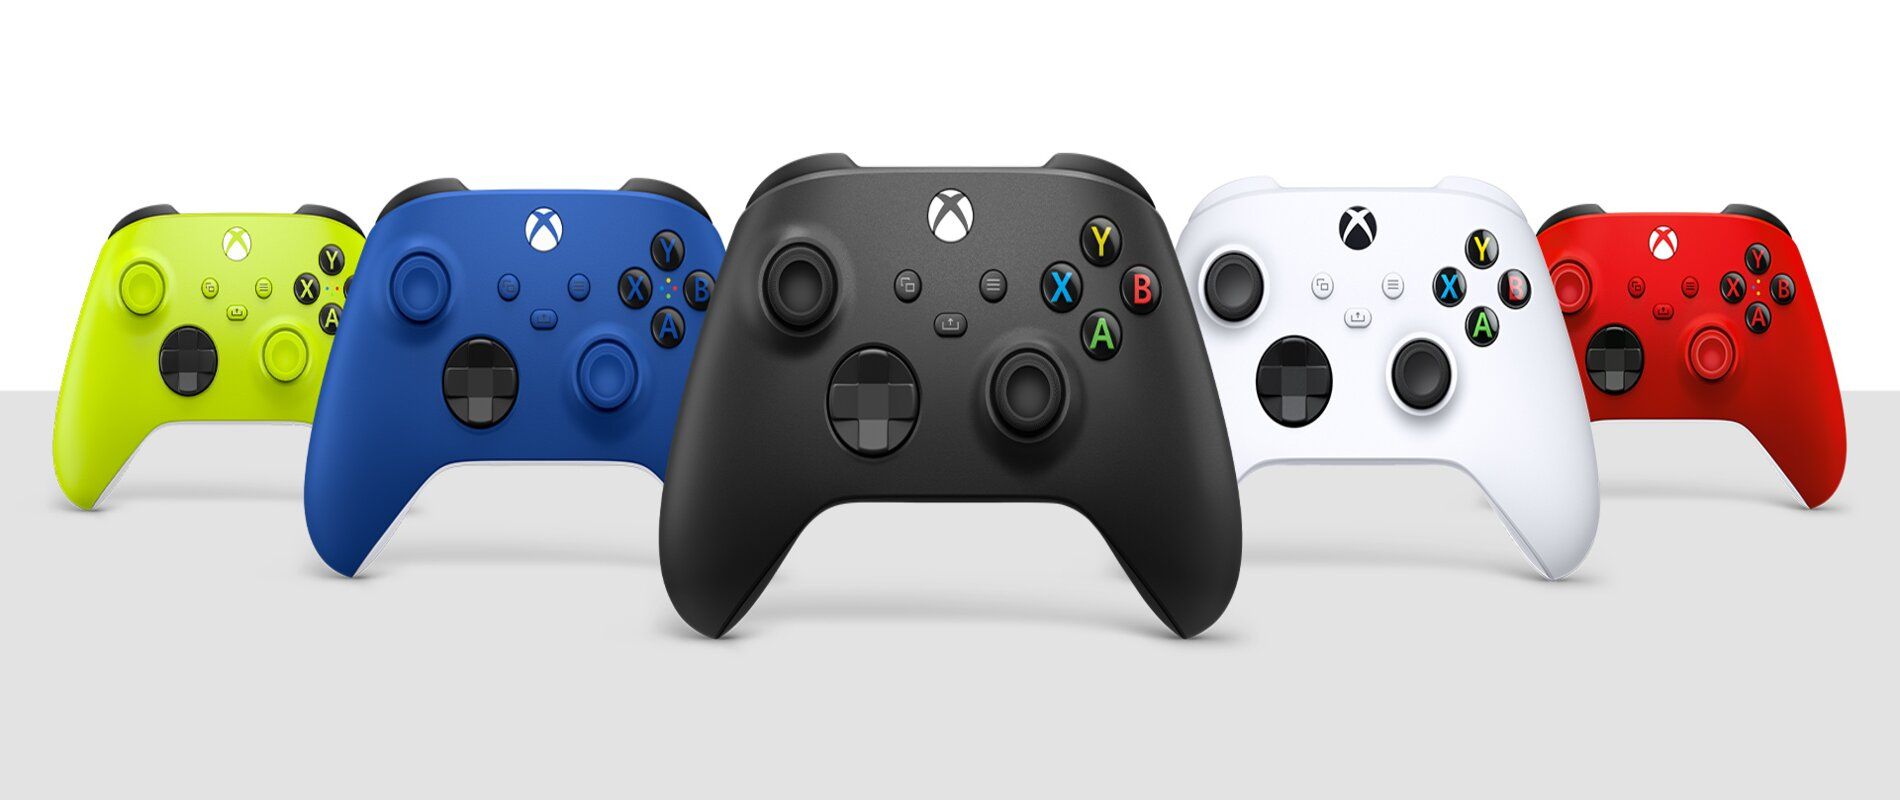 Choosing the Best Xbox Controller